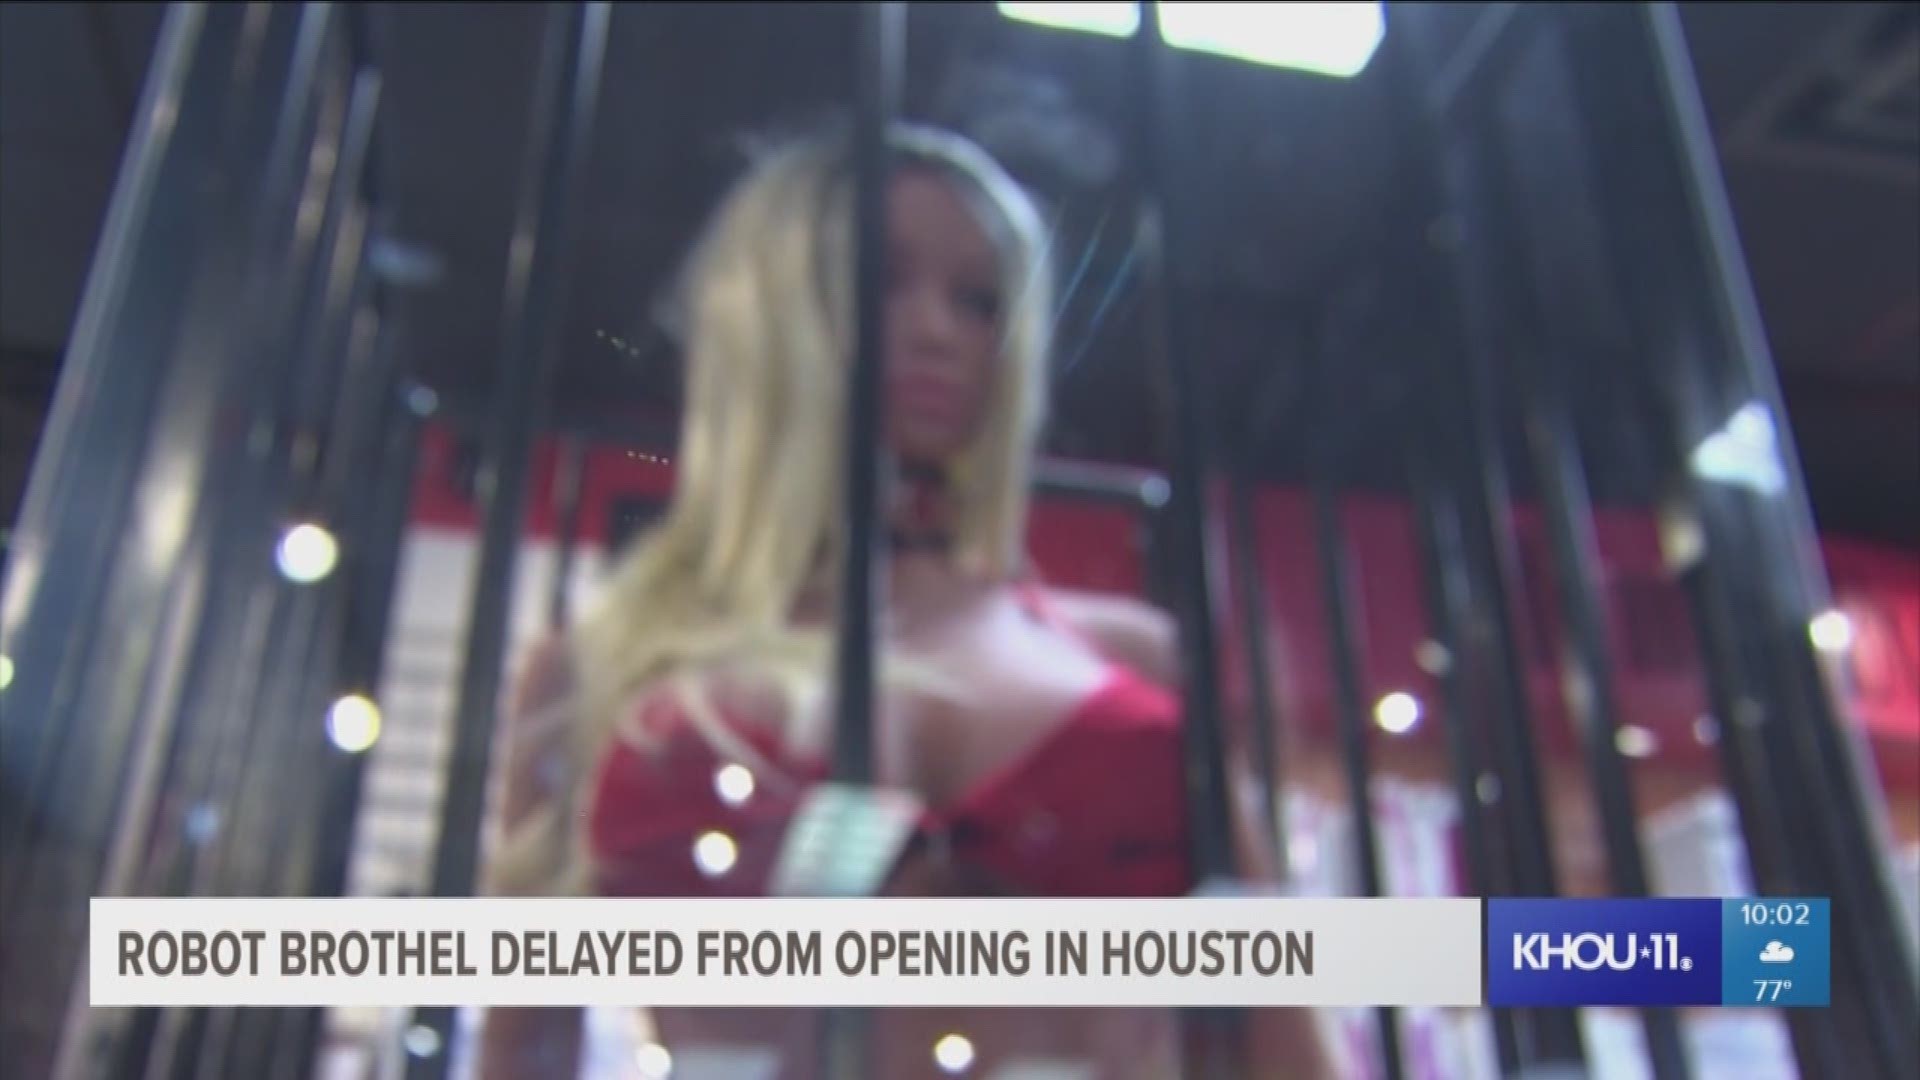 Houston's sex robot brothel won't be opening as soon as planned. City inspectors found work crews performing demo work without proper permits, according to Houston Public Works.